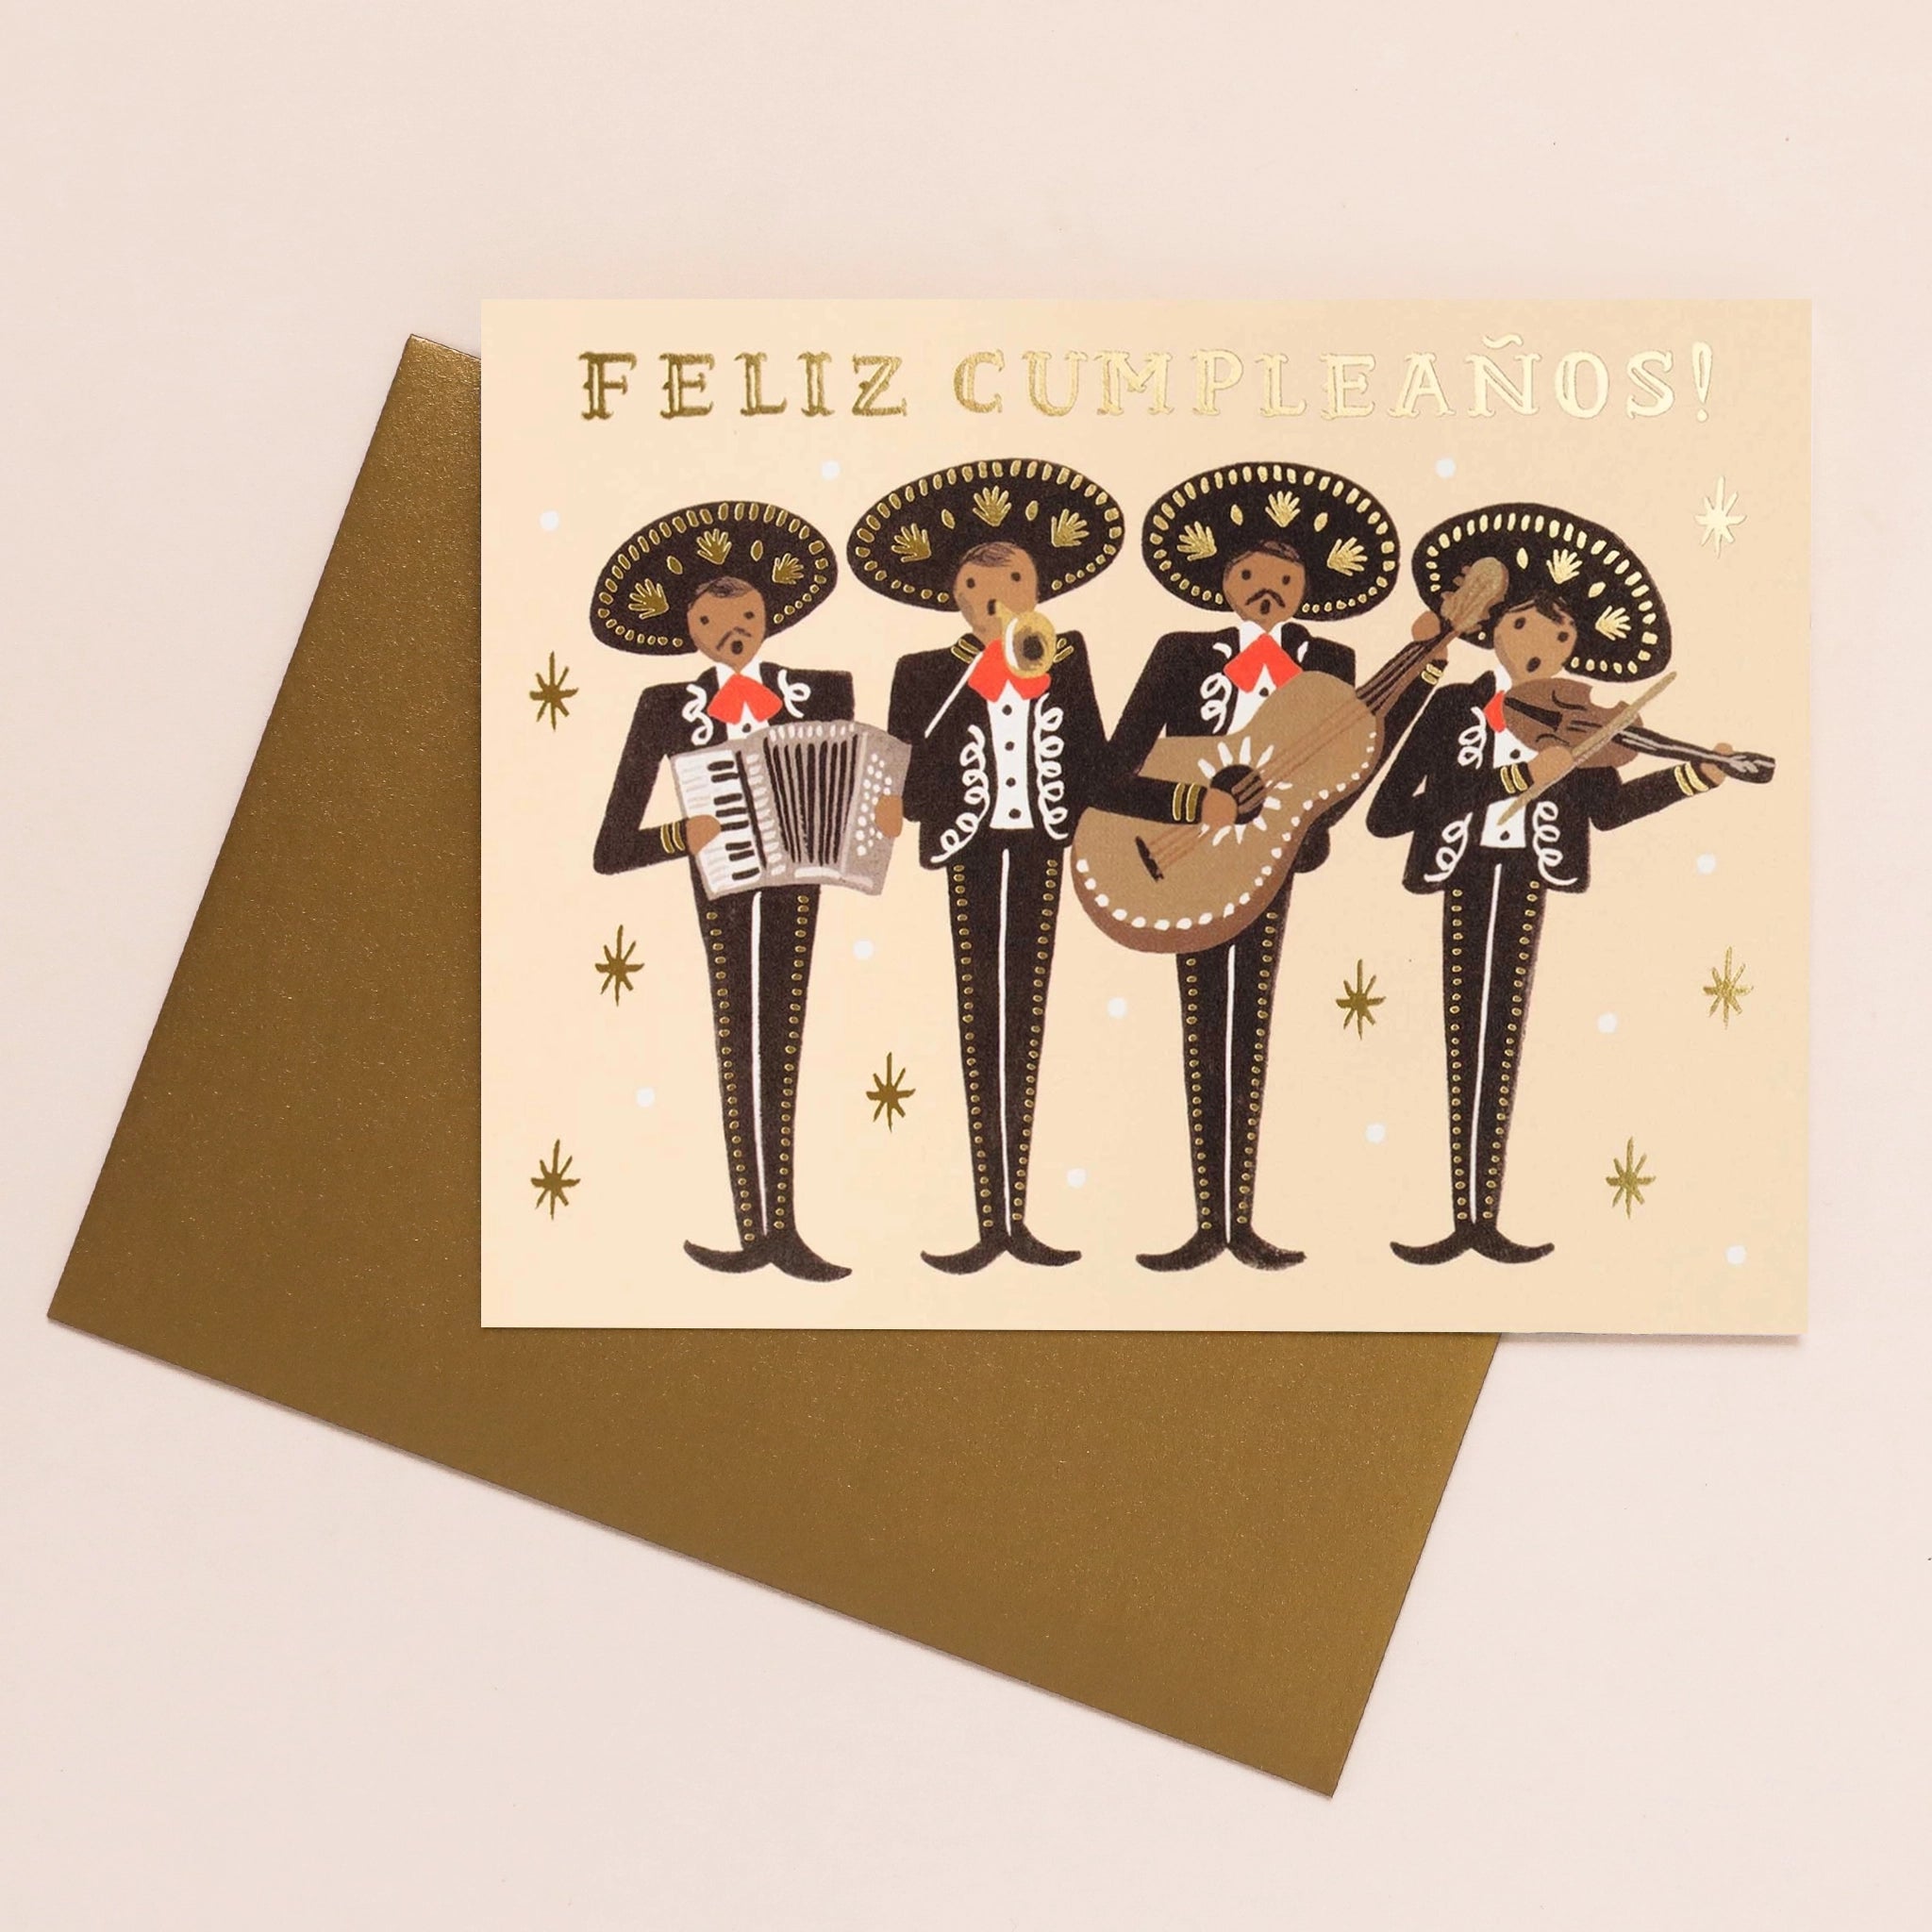 On a cream background is a tan card with a four man mariachi band playing instruments with black suits hats with gold detailing along with gold foiled text at the top that reads, &quot;Feliz Cumpleaños!&quot;. It is also accompanies by a gold envelope.